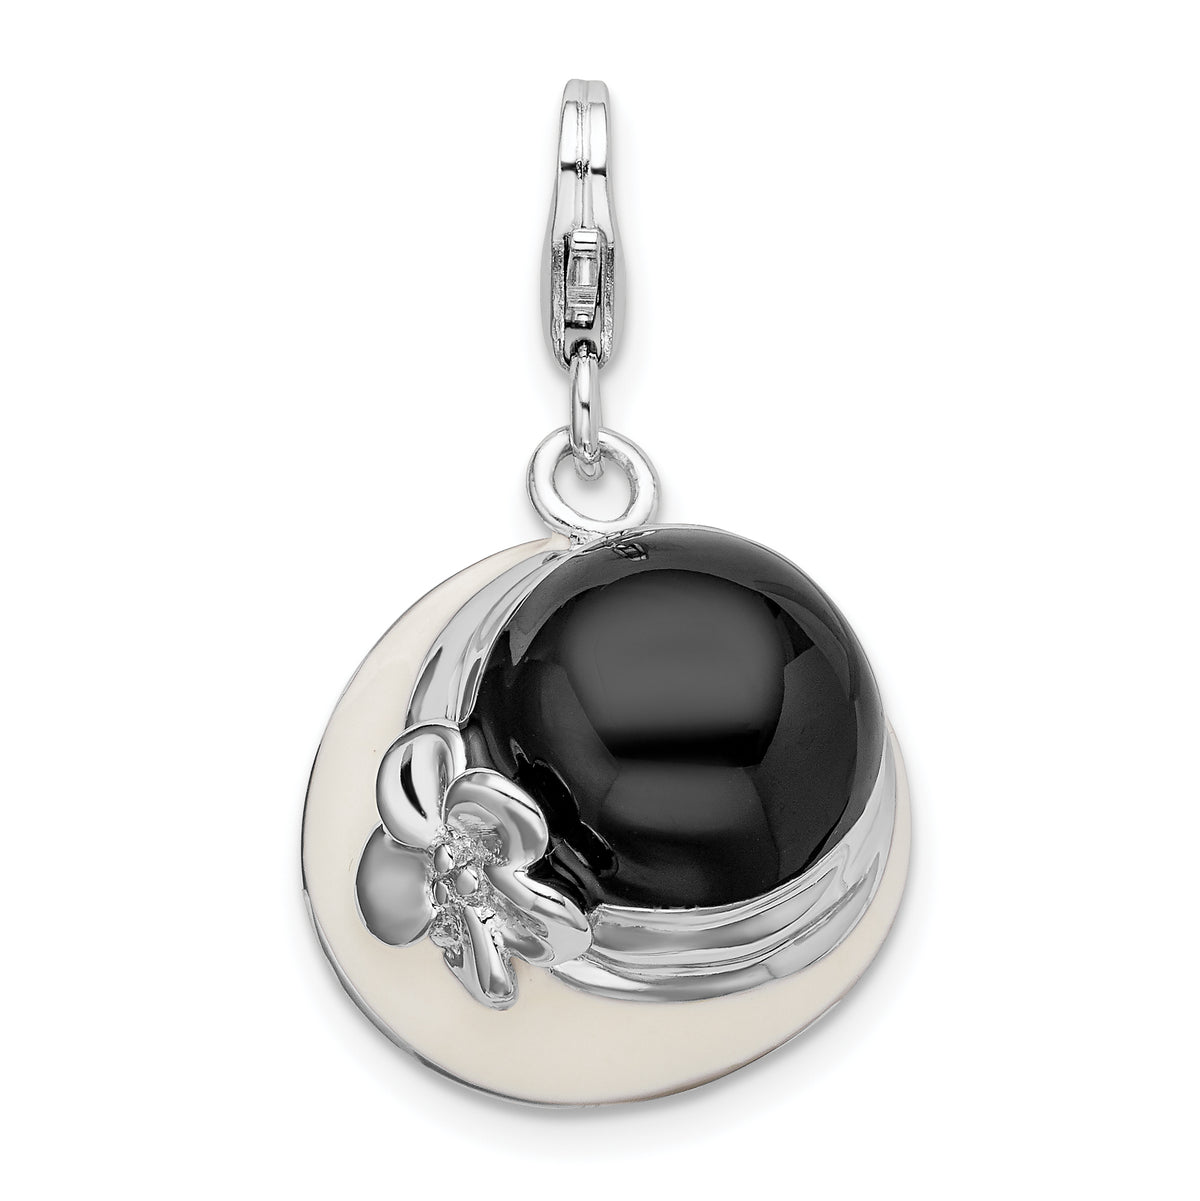 Amore La Vita Sterling Silver Rhodium-plated Polished 3-D Black and White Enameled Hat Charm with Fancy Lobster Clasp